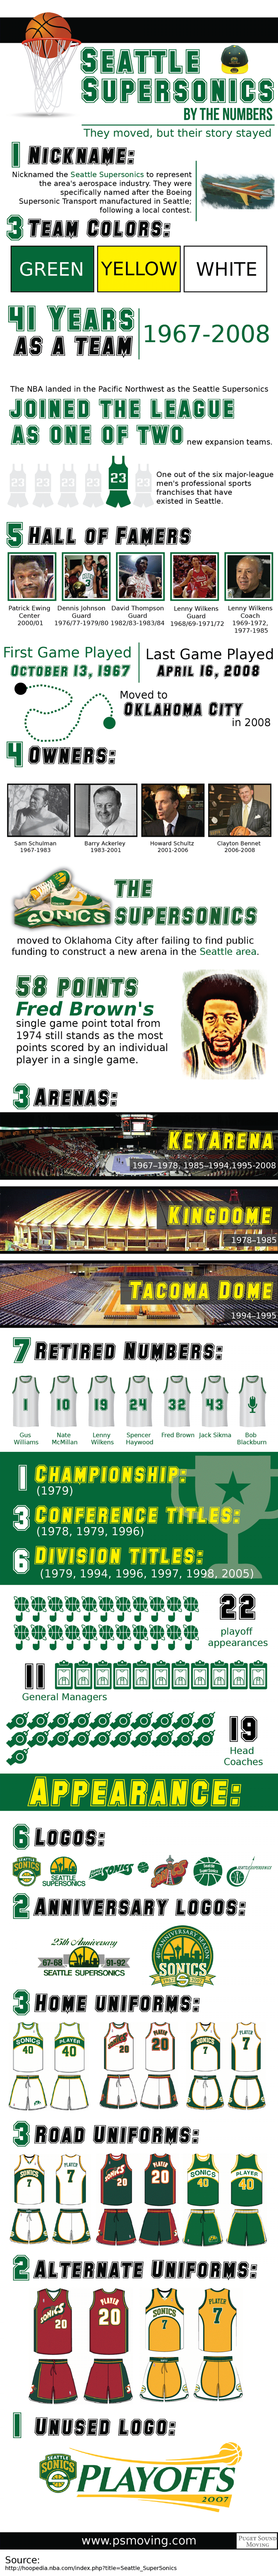 Seattle Supersonics by the Numbers Infographic